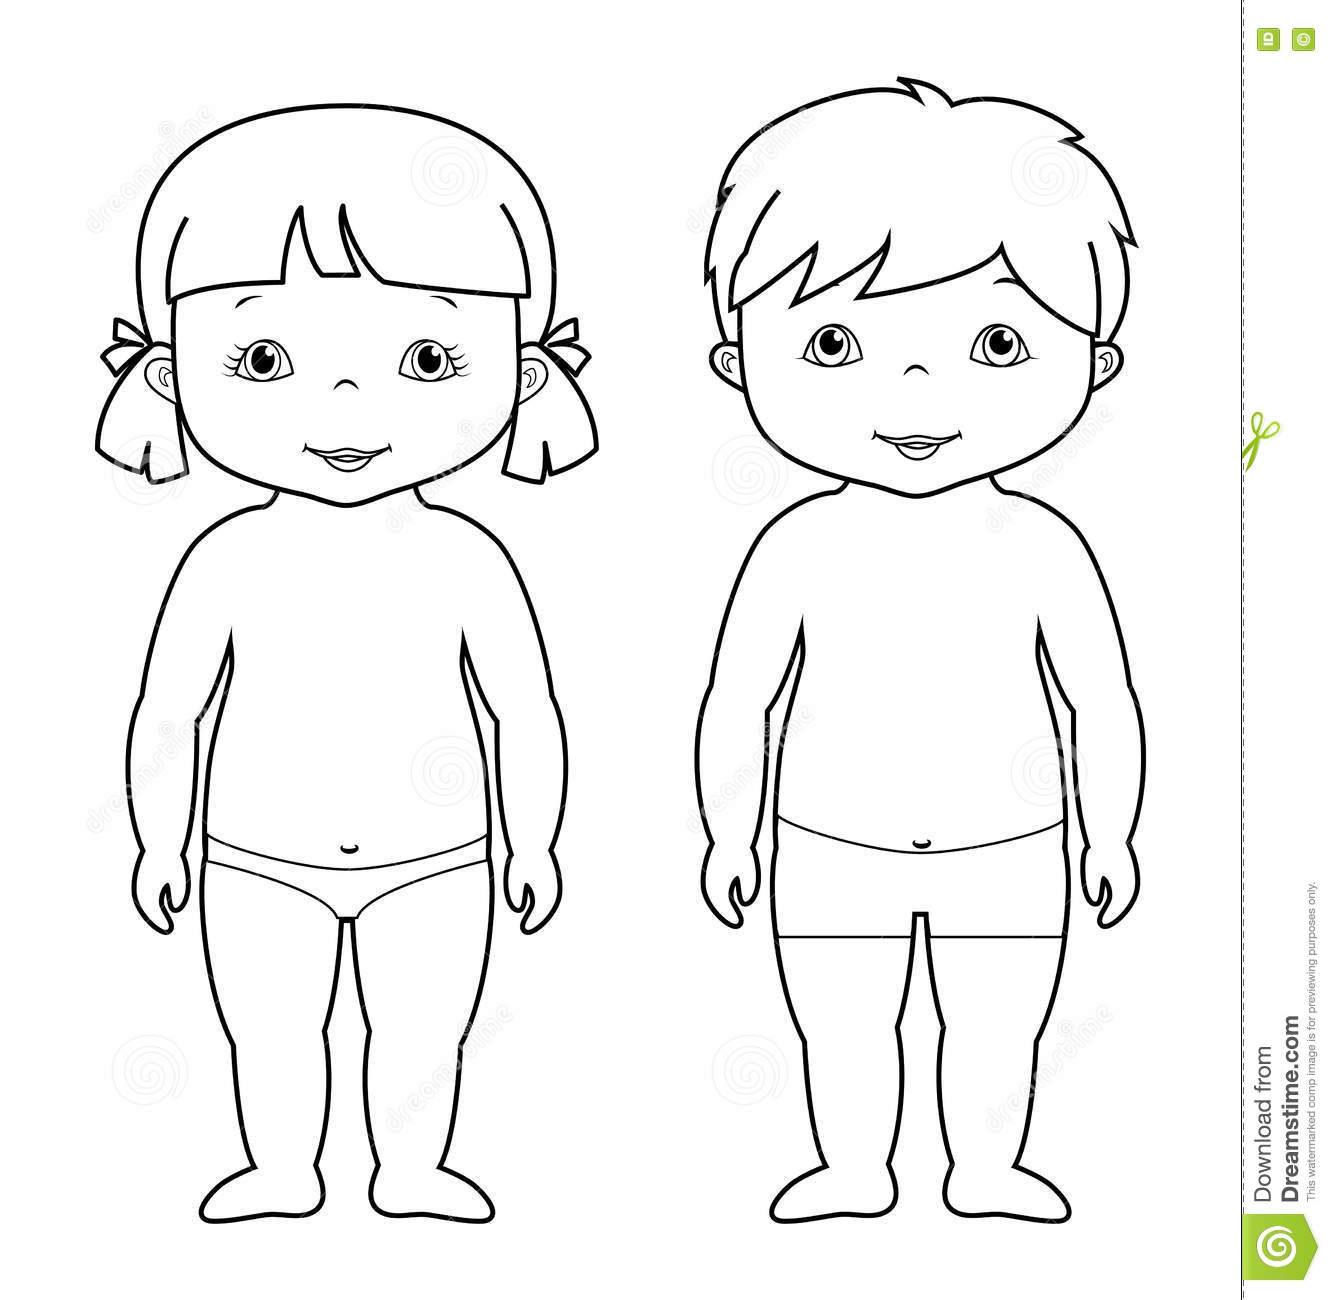 Coloring Pages For Girls And Boys
 Vector Coloring Page Cute Baby Boy And Girl Stock